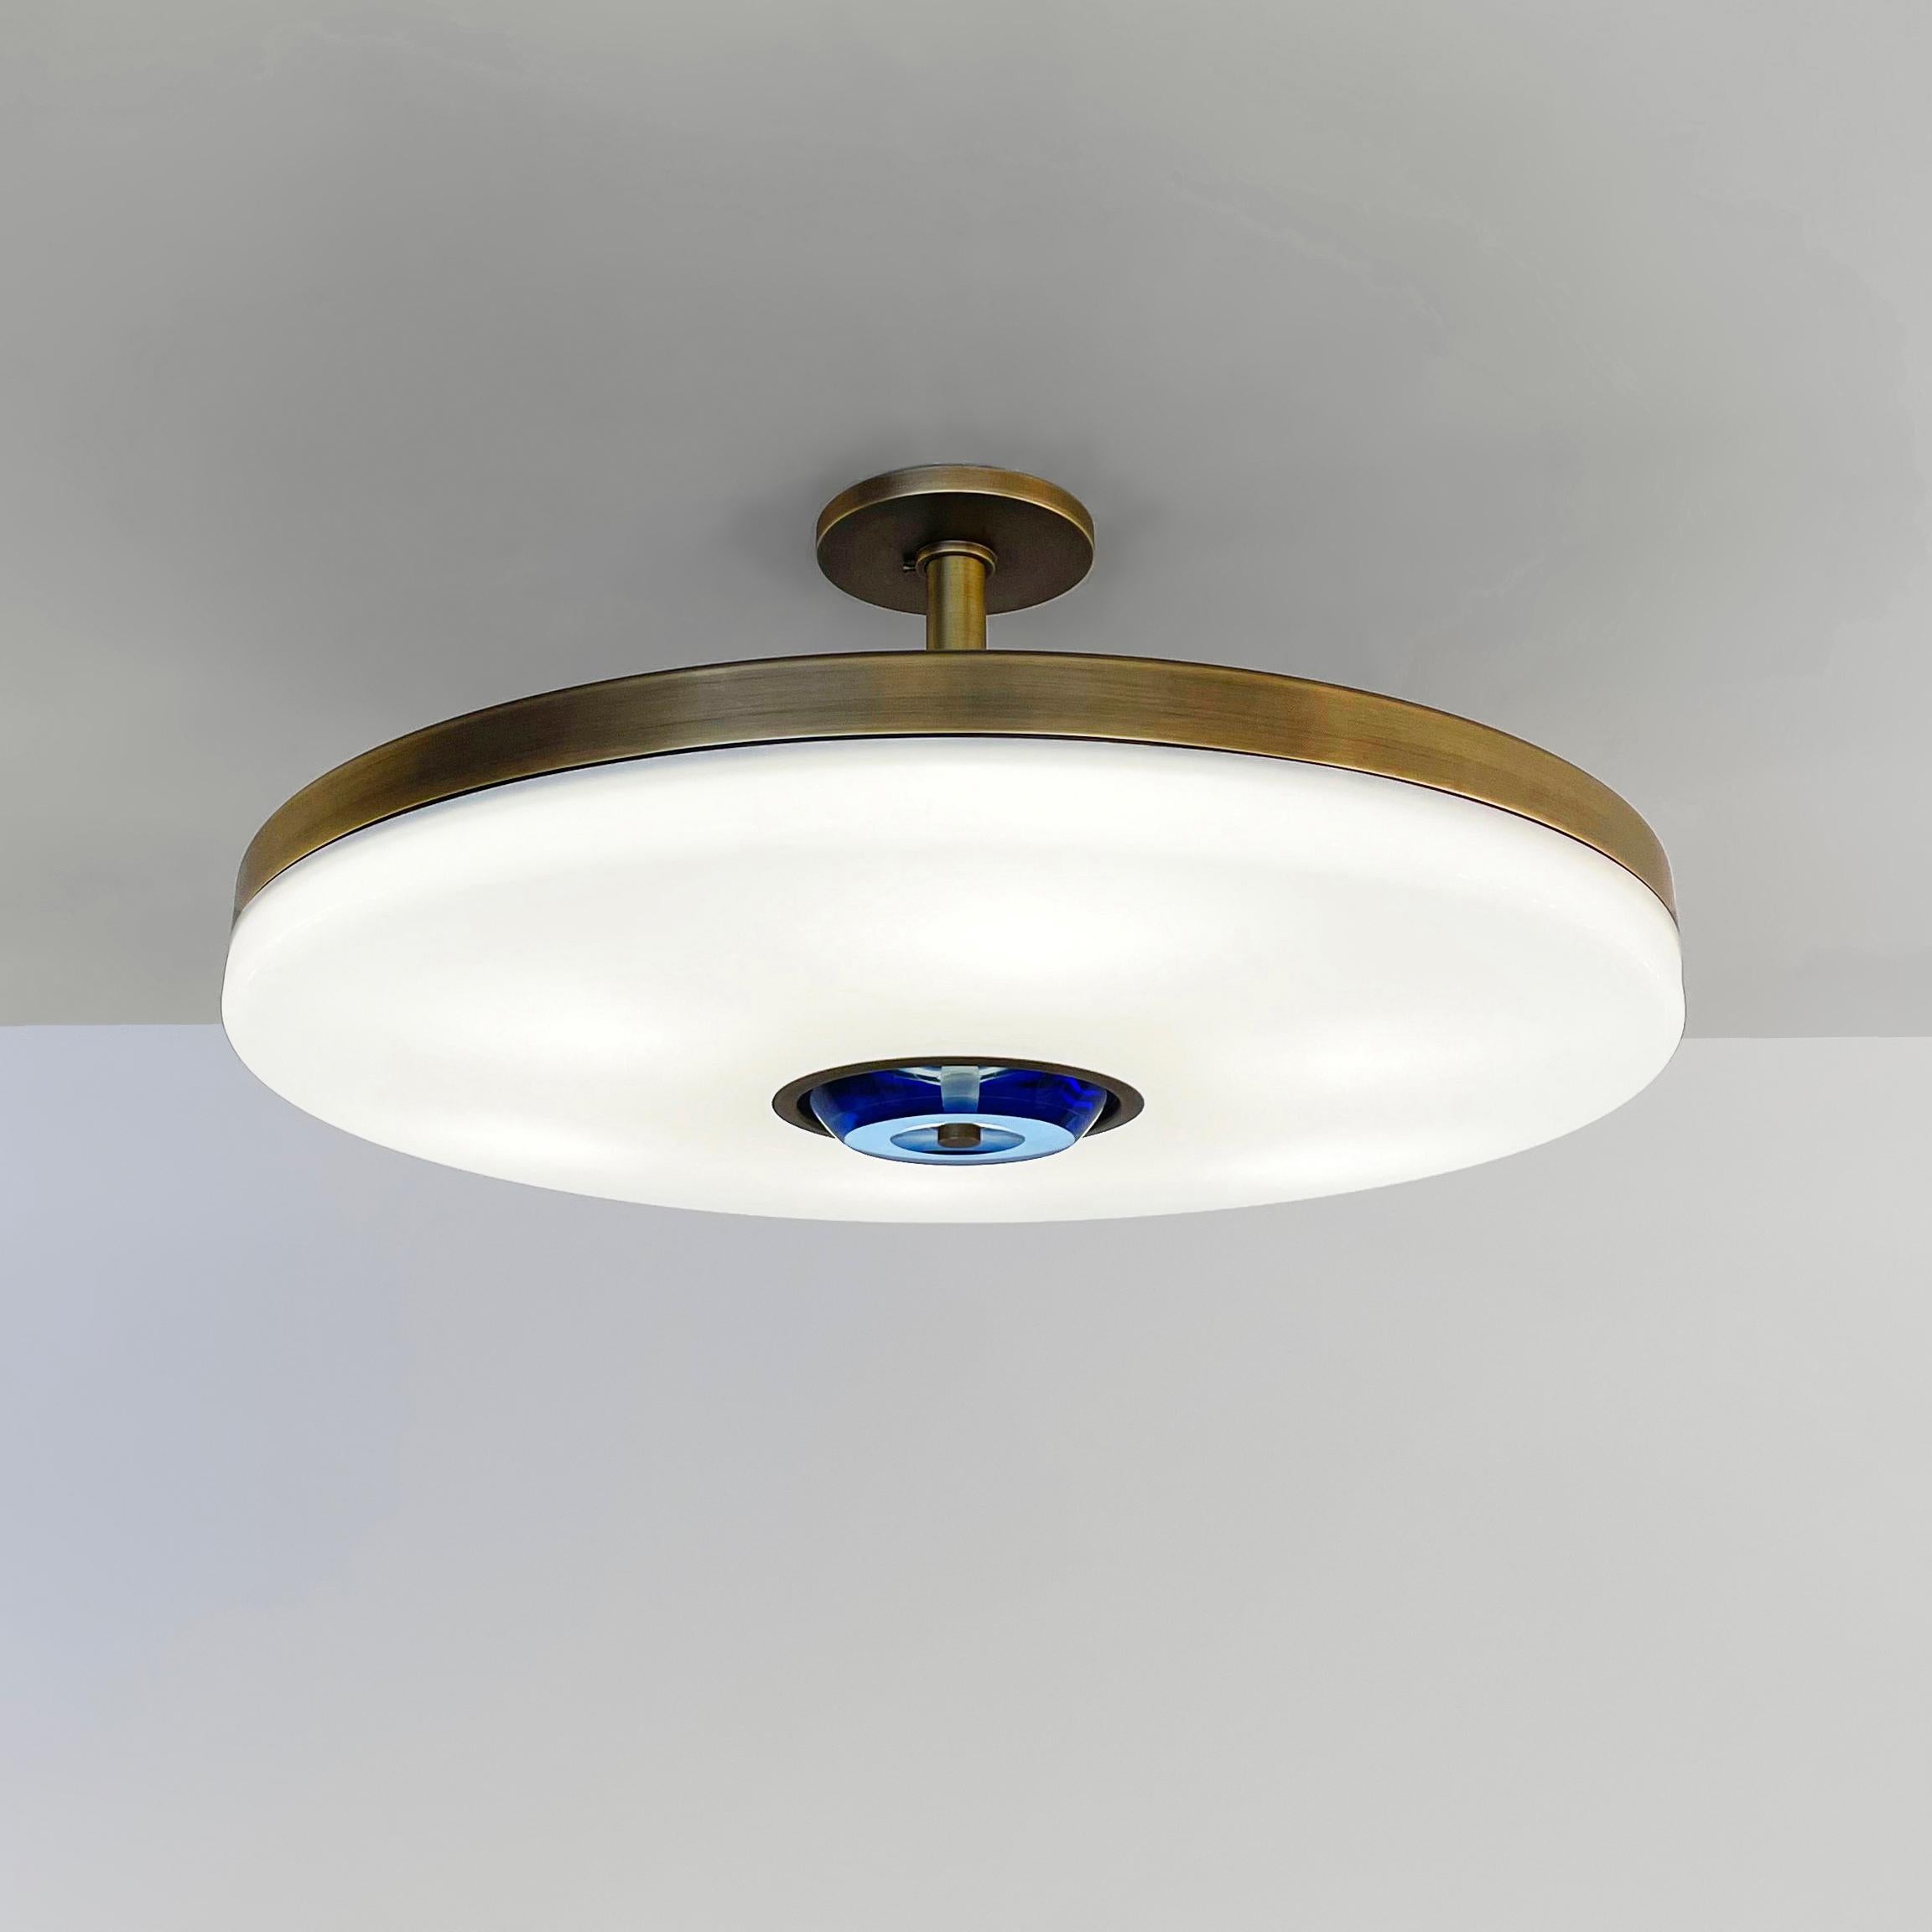 Iris Ceiling Light by Gaspare Asaro - Polished Nickel Finish In New Condition For Sale In New York, NY